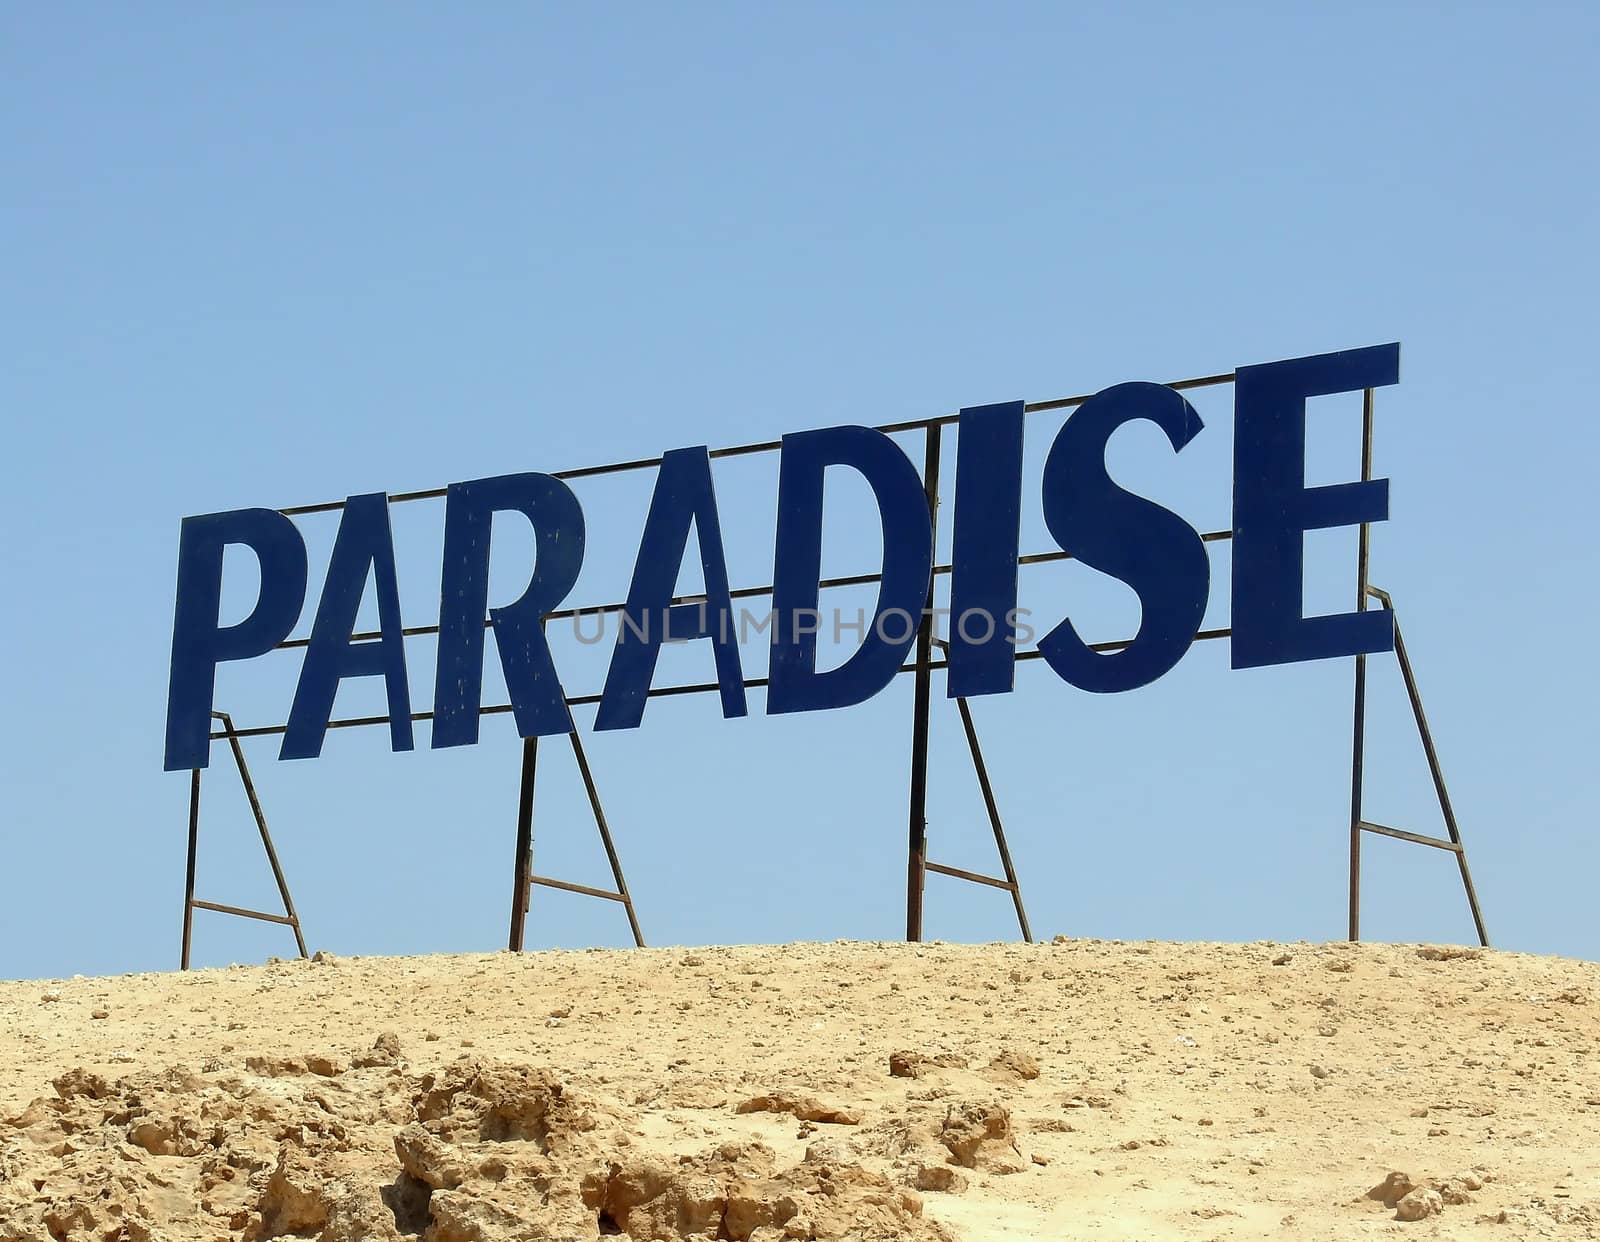 Paradise. Written letters on a background of blue sky in the desert.